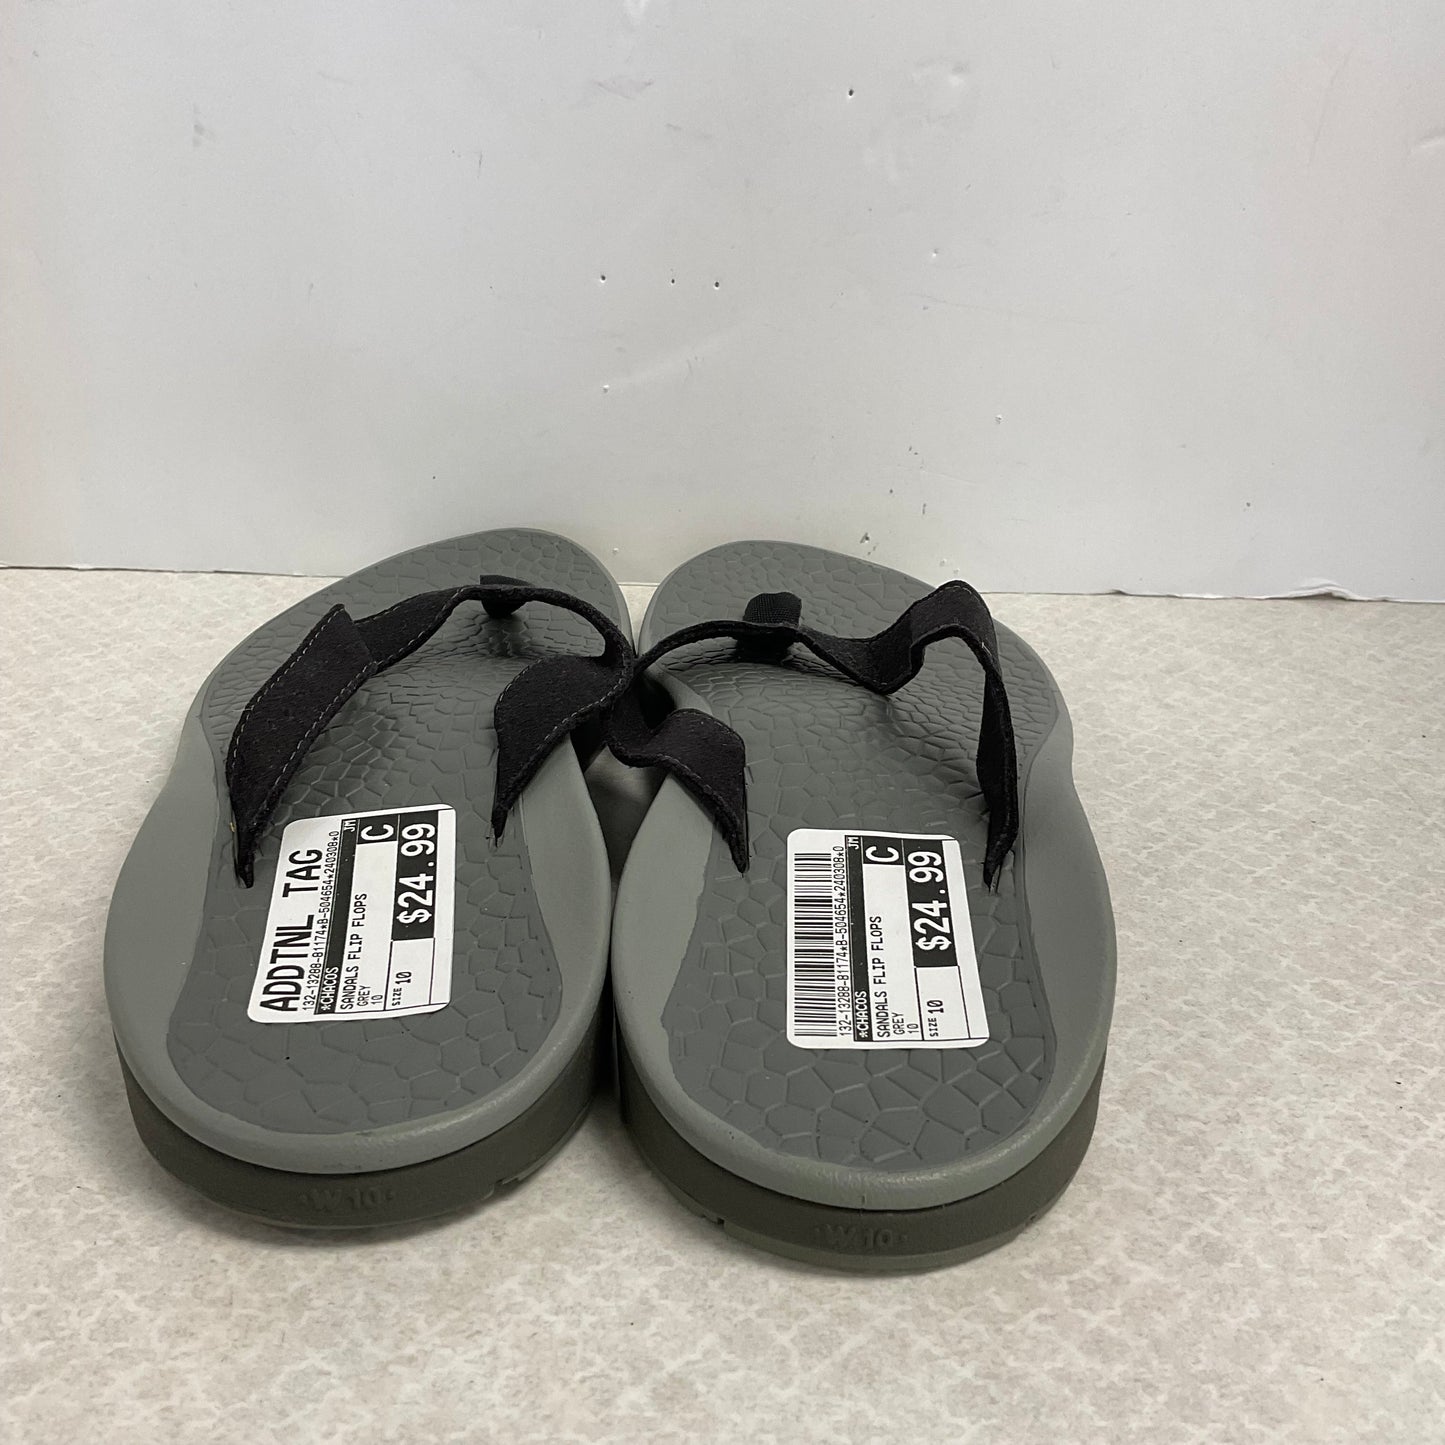 Sandals Flip Flops By Chacos  Size: 10